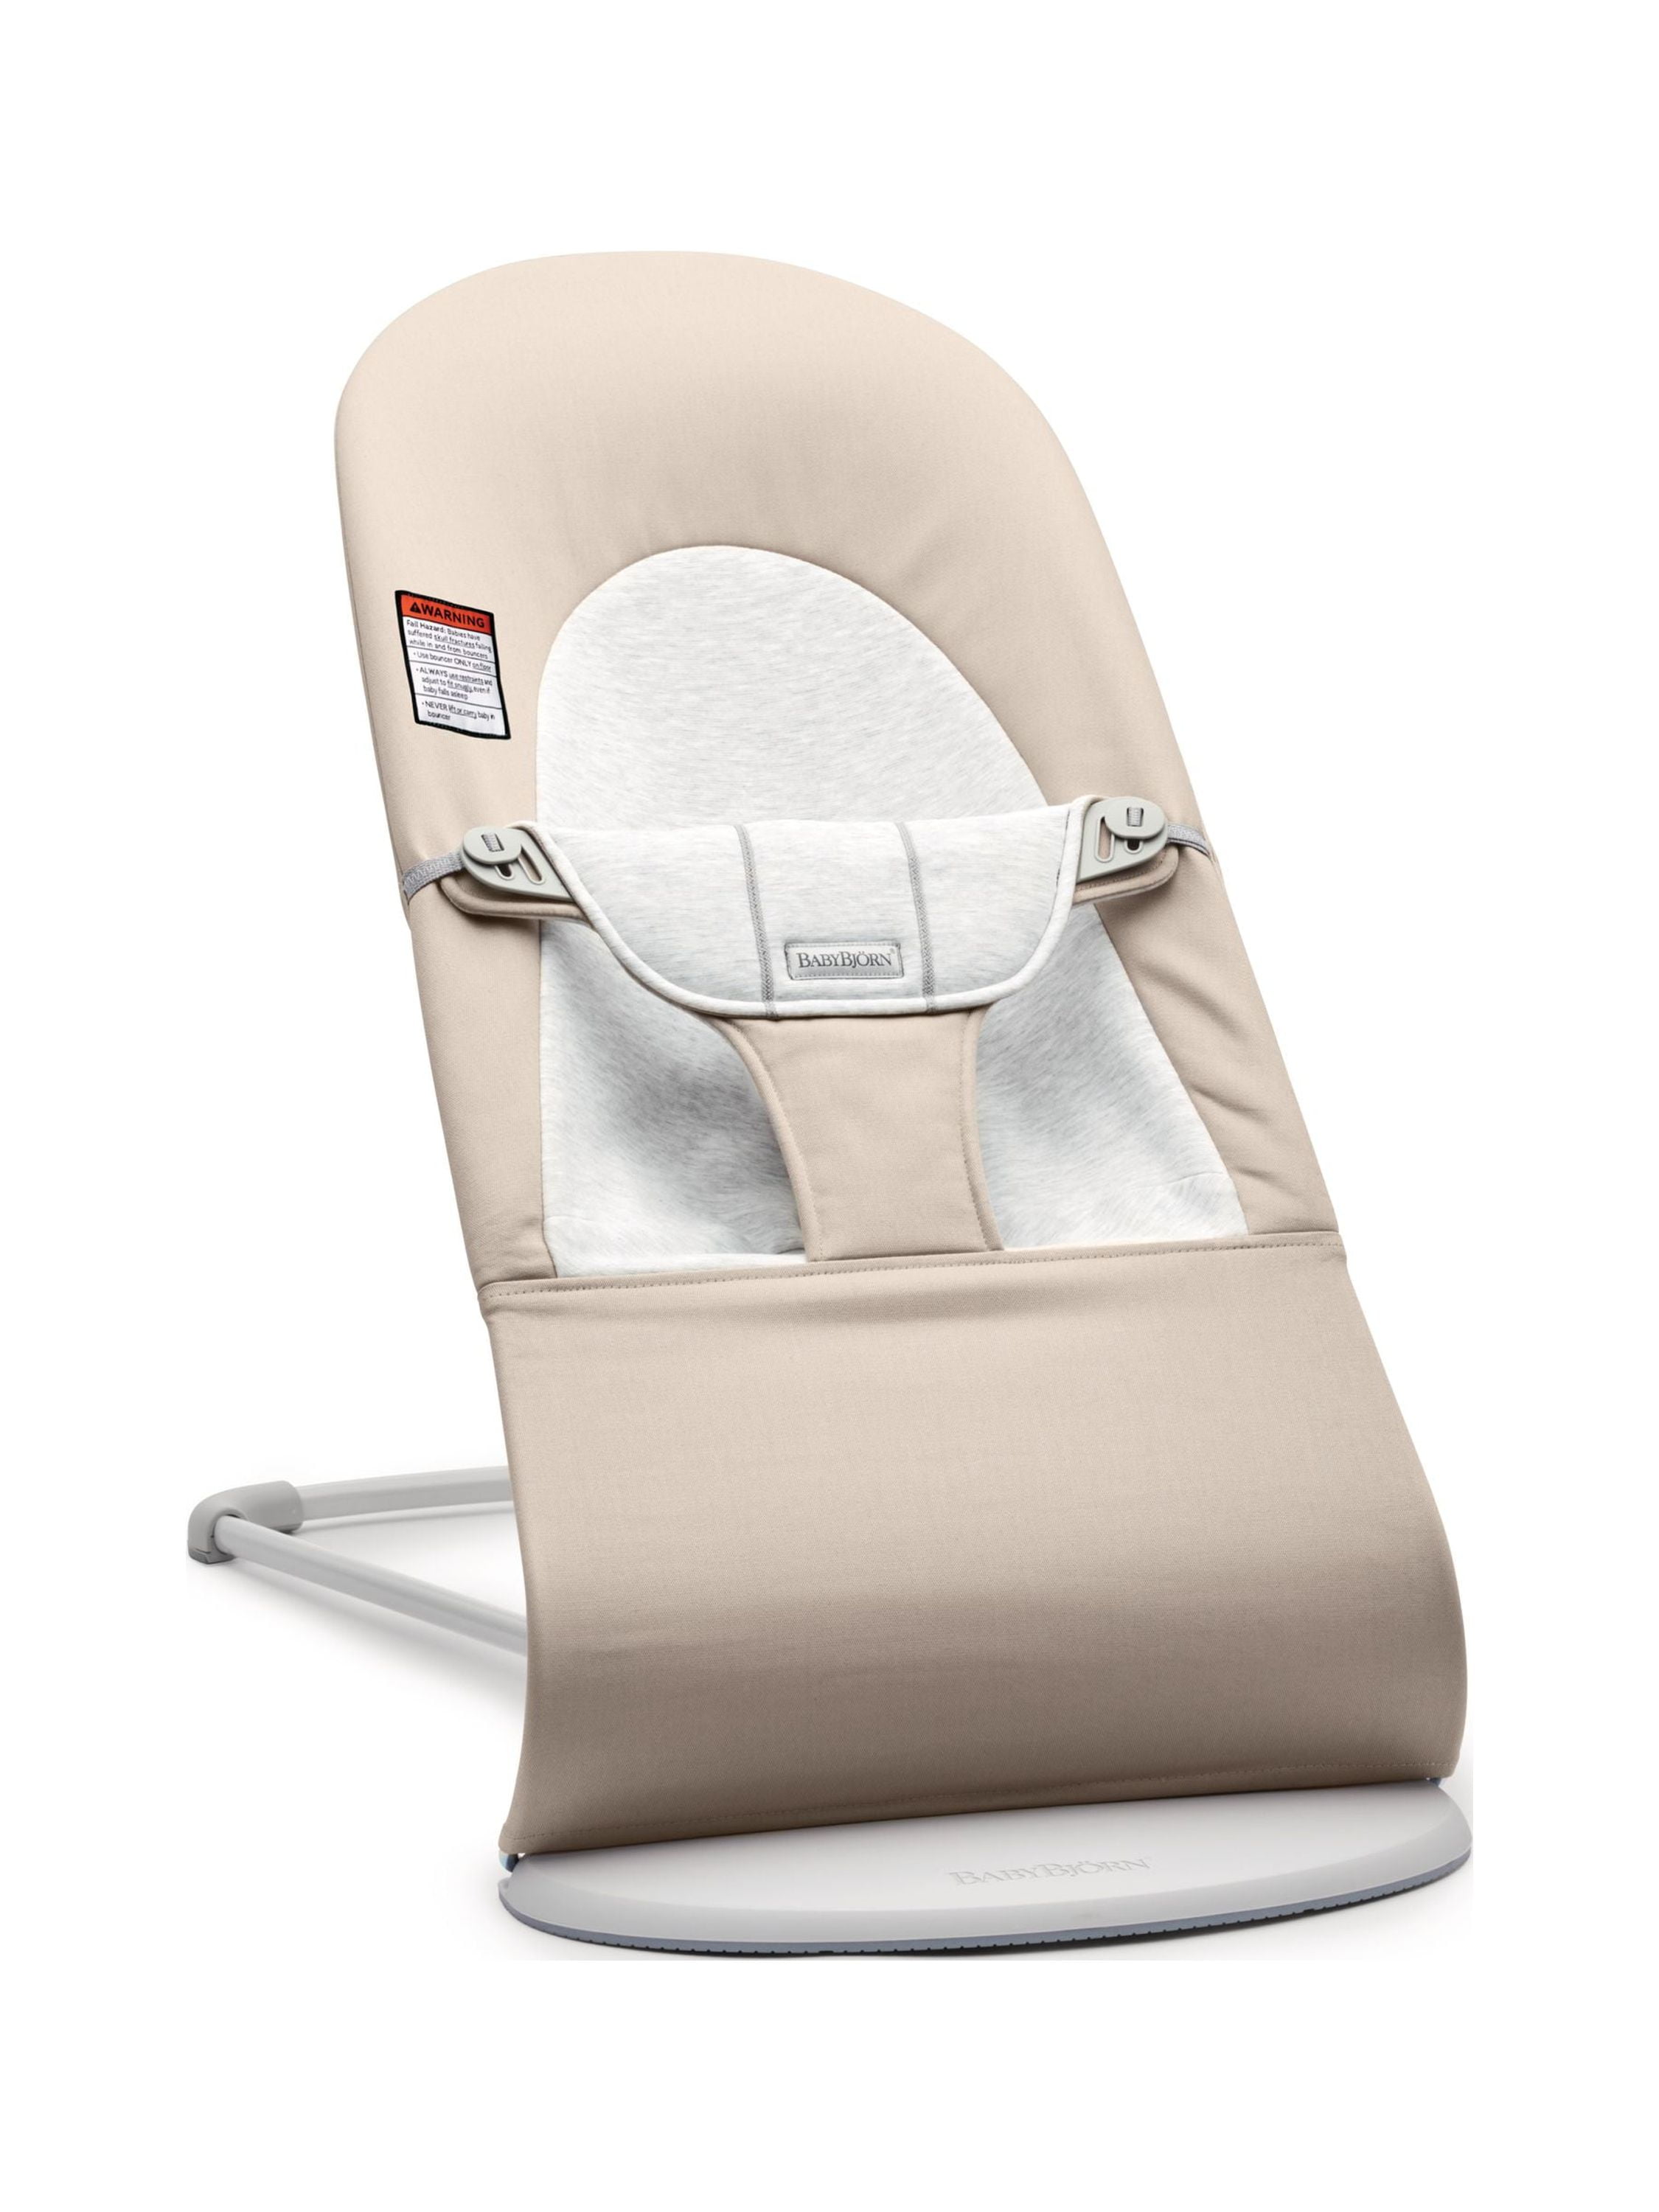 BabyBjorn Bouncer Balance Soft Review, Price and Features - Pros and Cons  of Baby Bjorn Bouncer Balance Soft